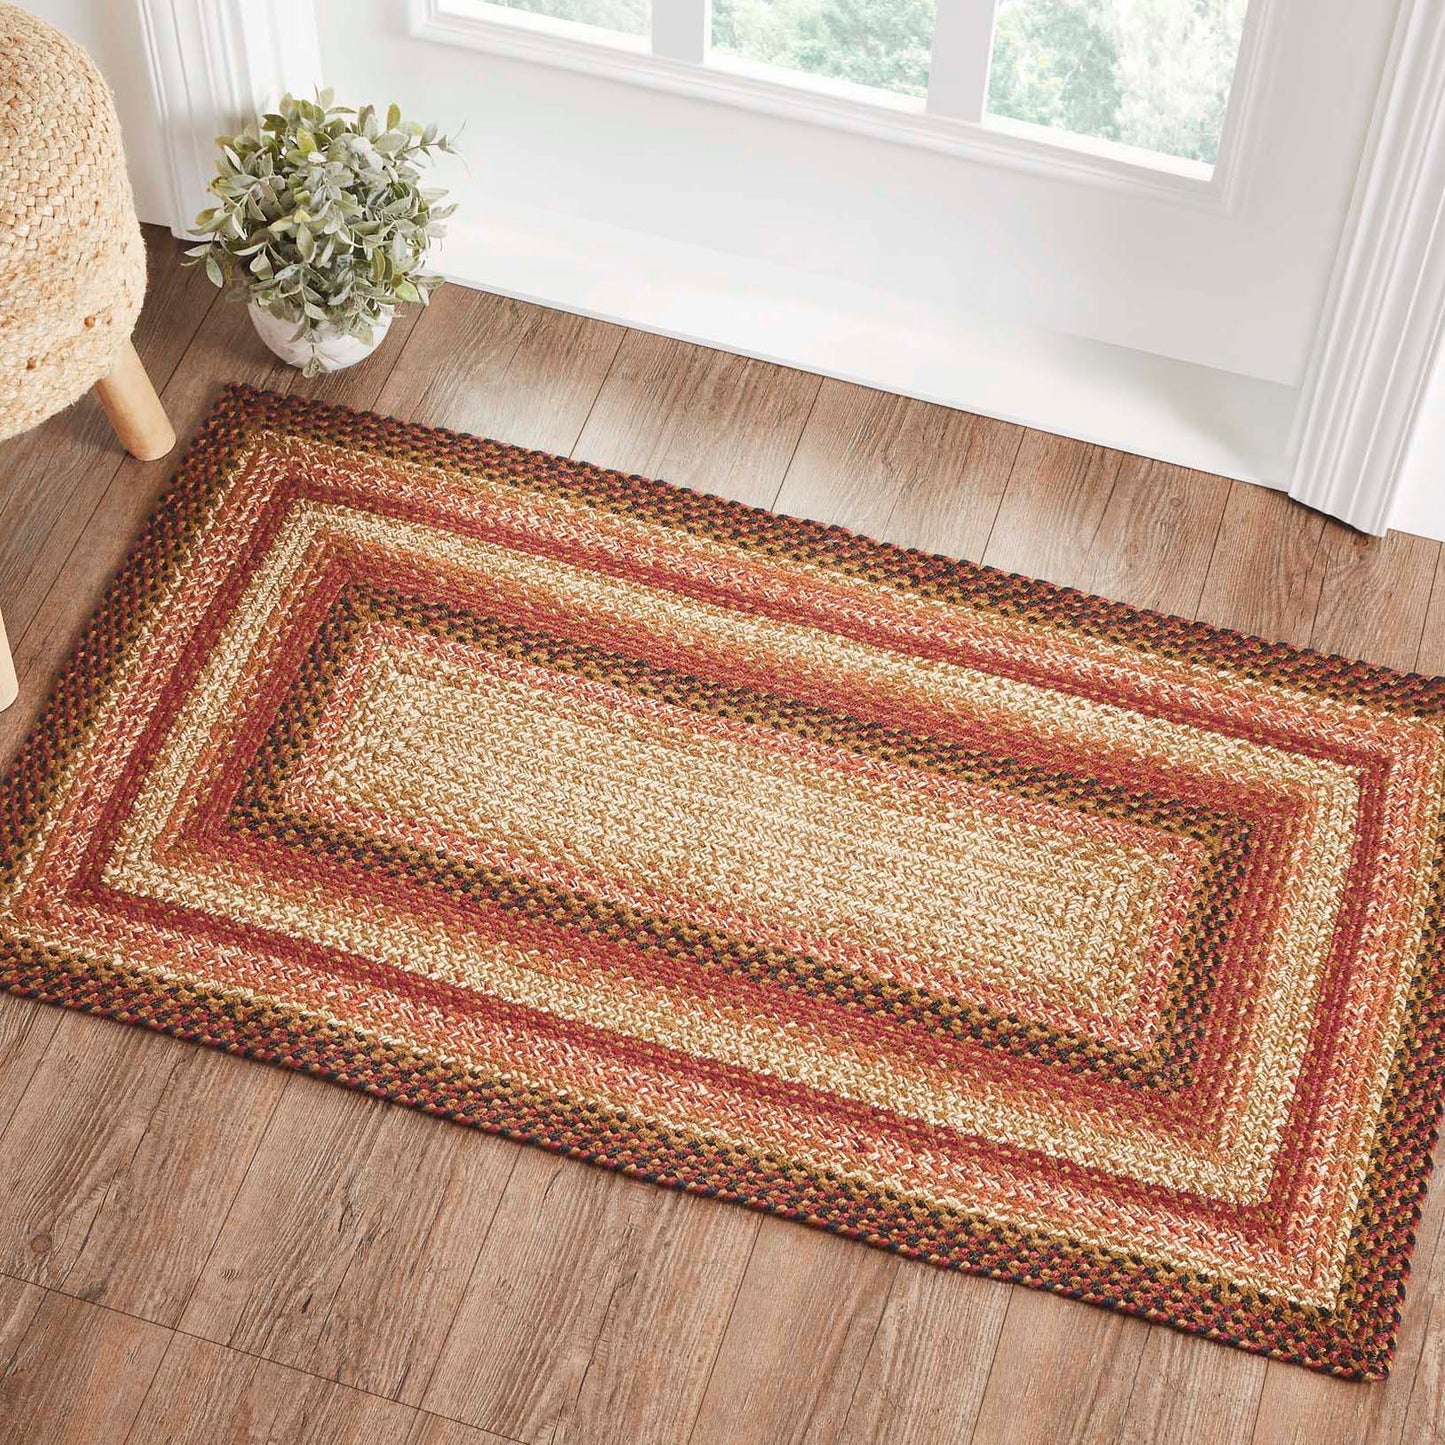 67118-Ginger-Spice-Jute-Rug-Rect-w-Pad-27x48-image-1